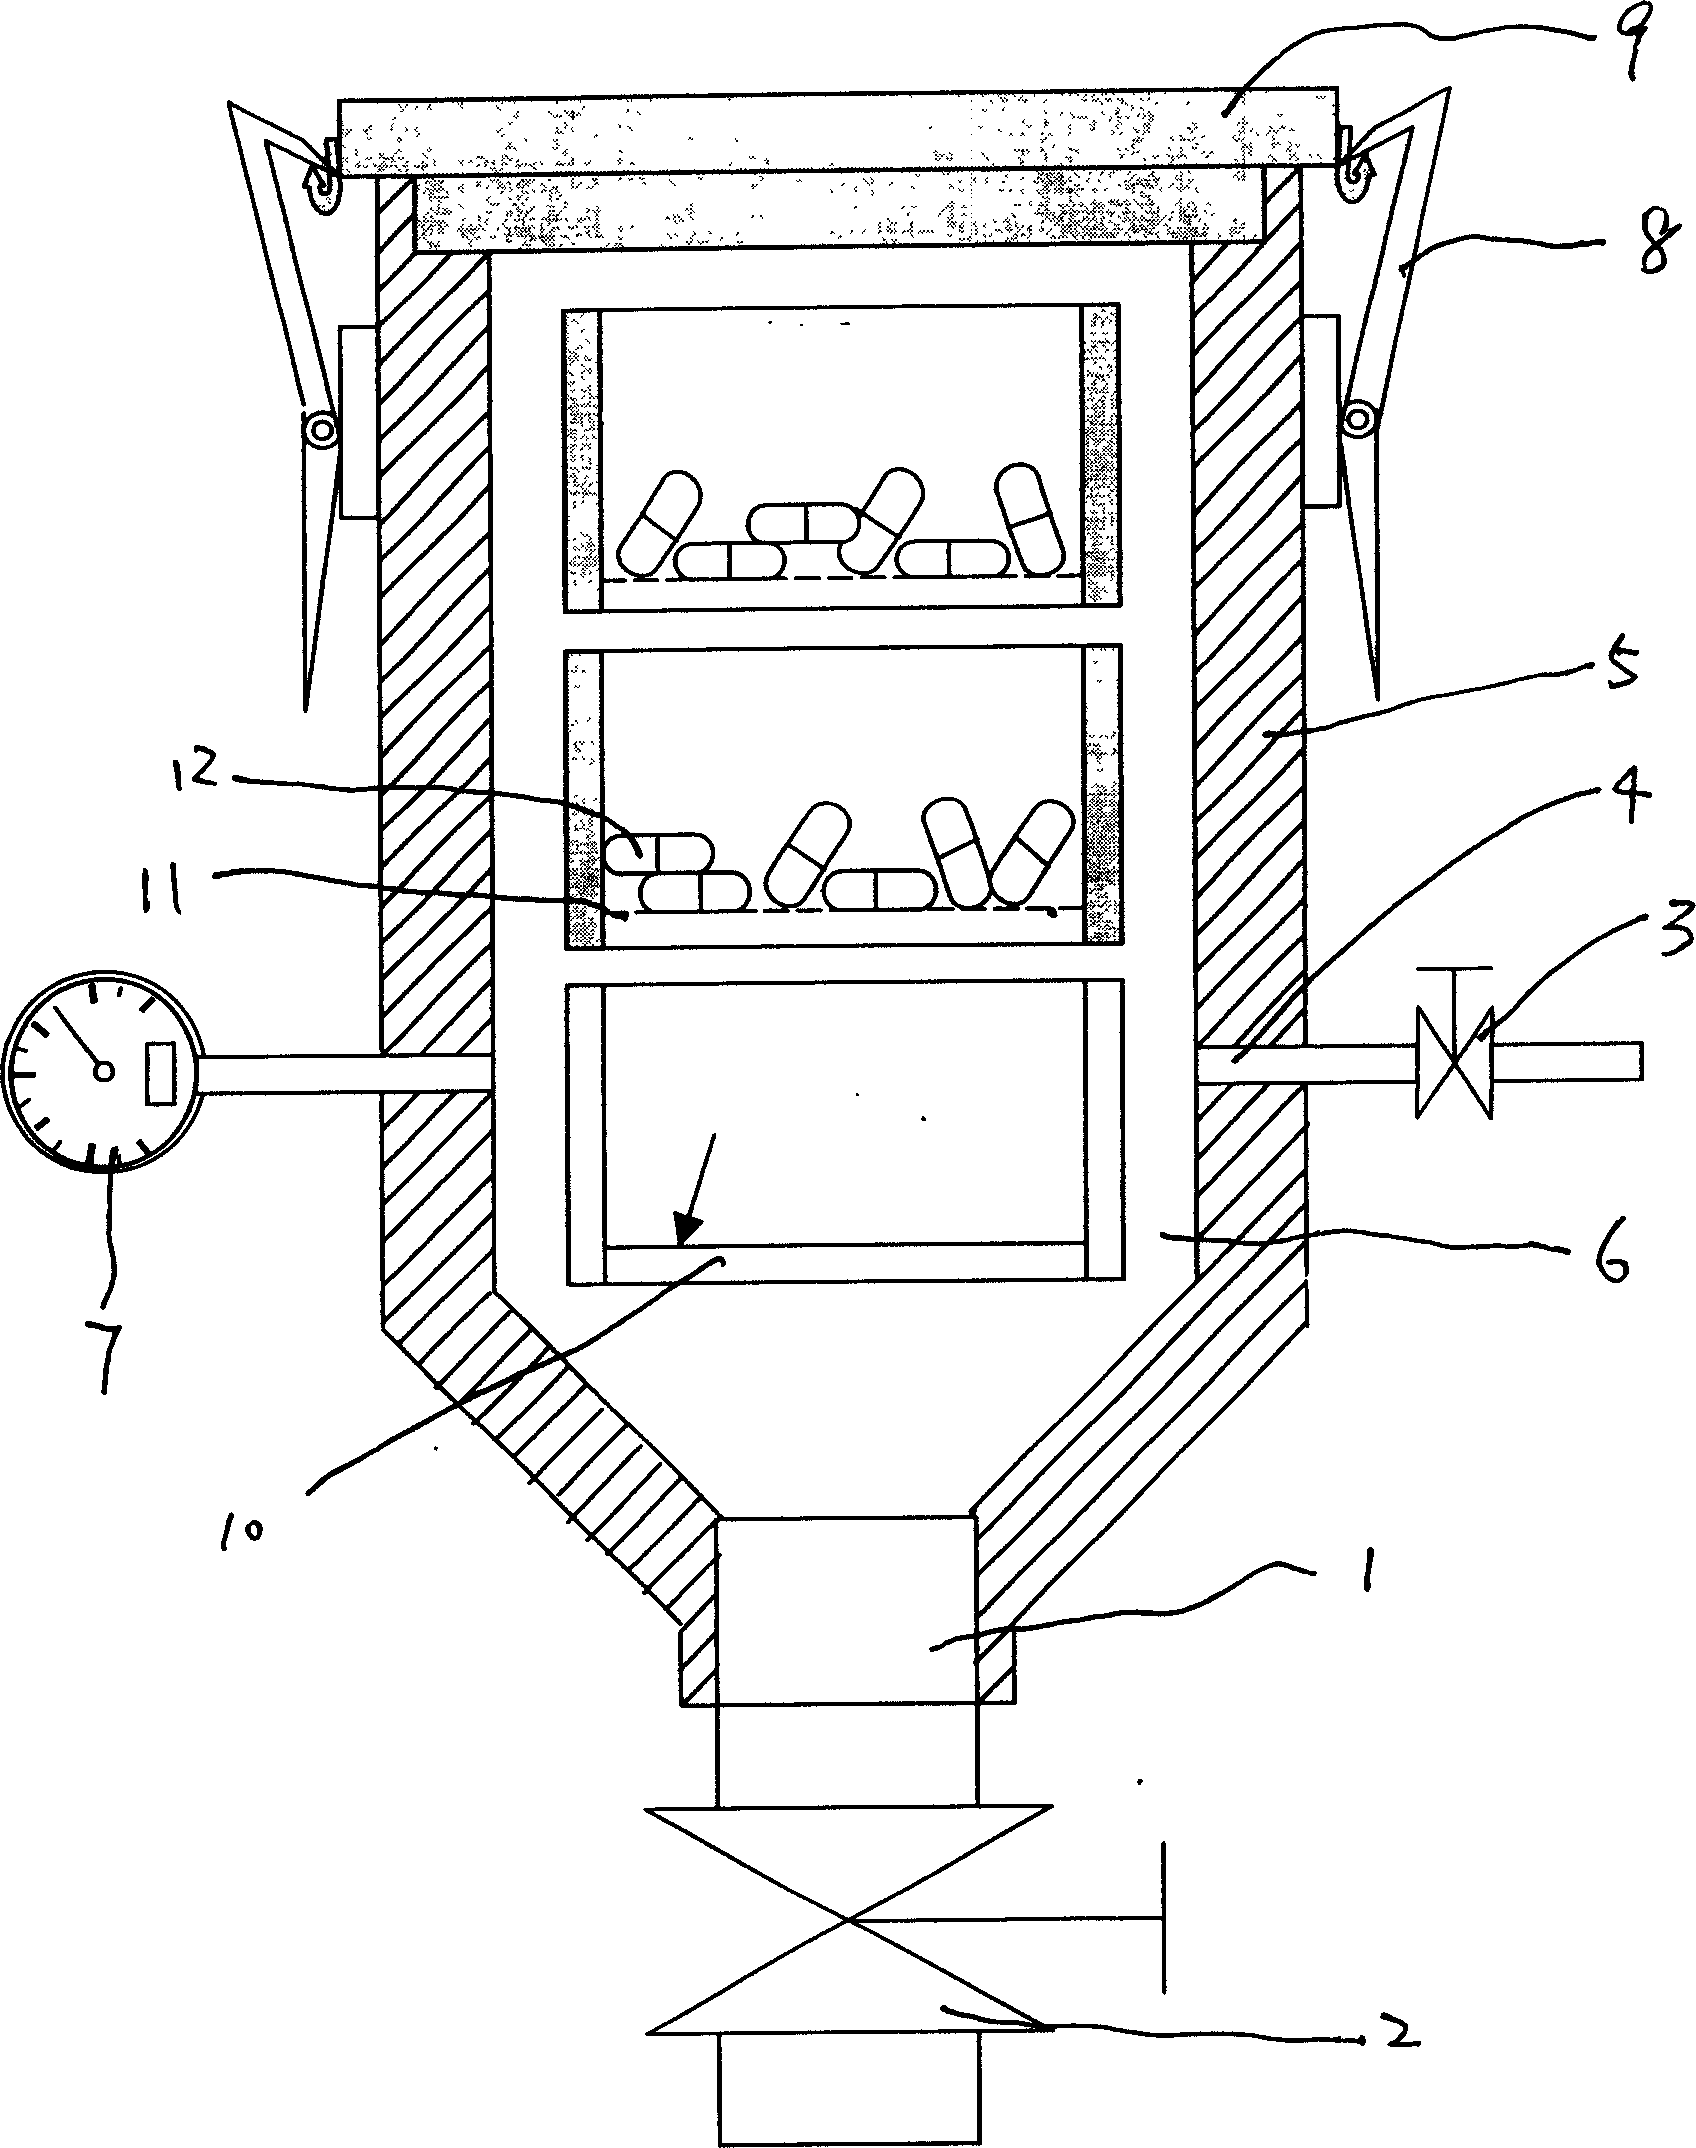 Capsule dismantling method and apparatus